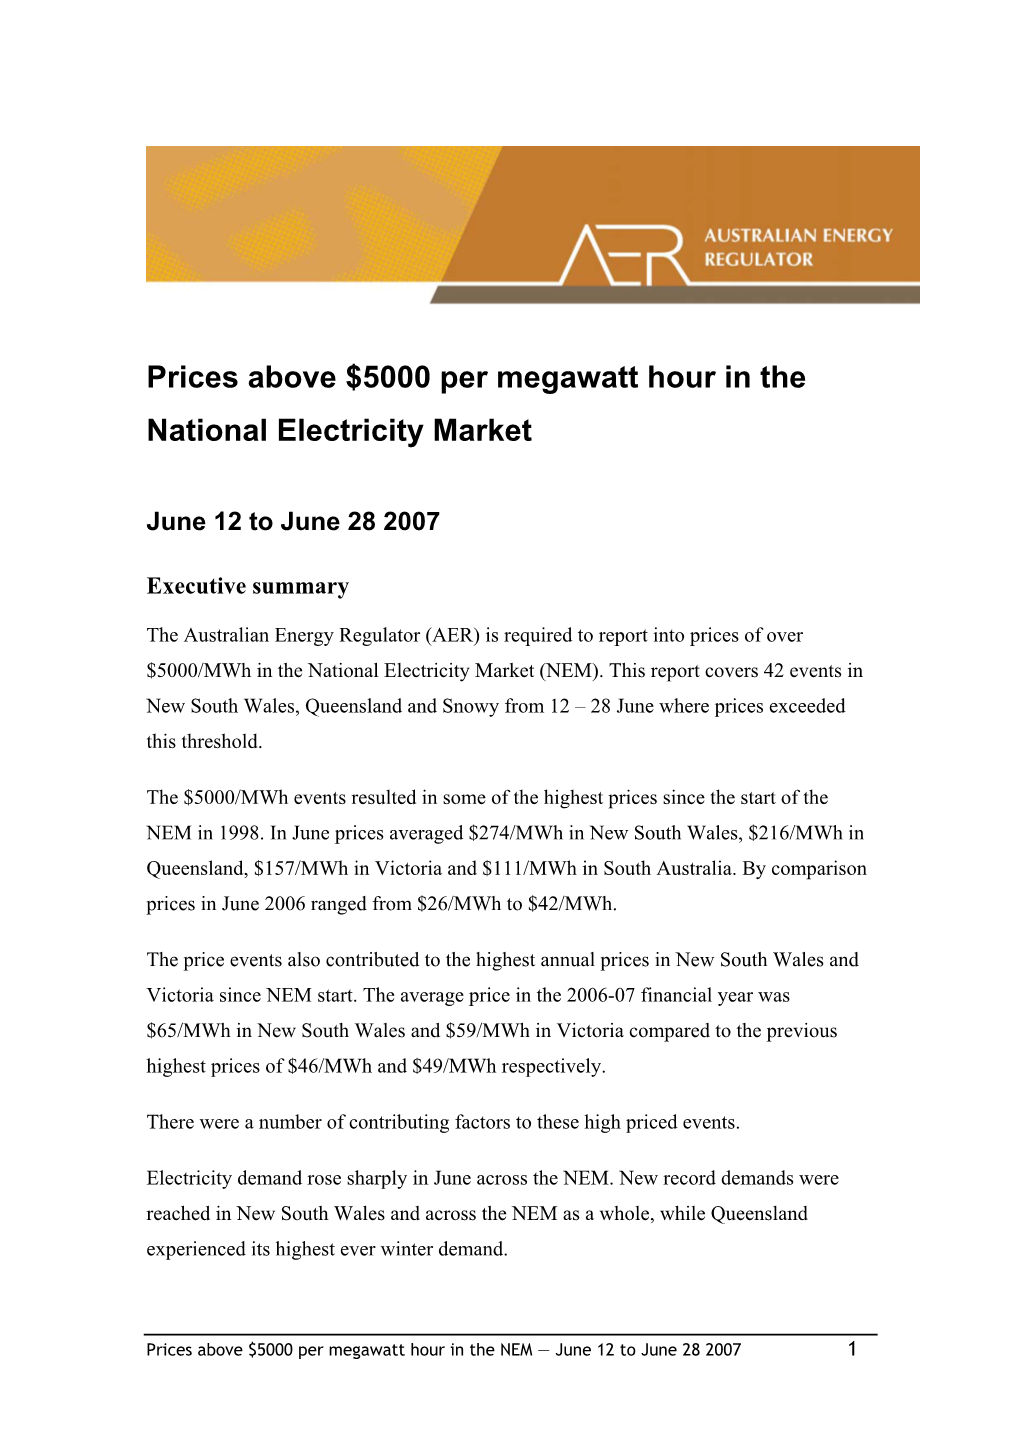 Prices Above $5000 Per Megawatt Hour in the National Electricity Market